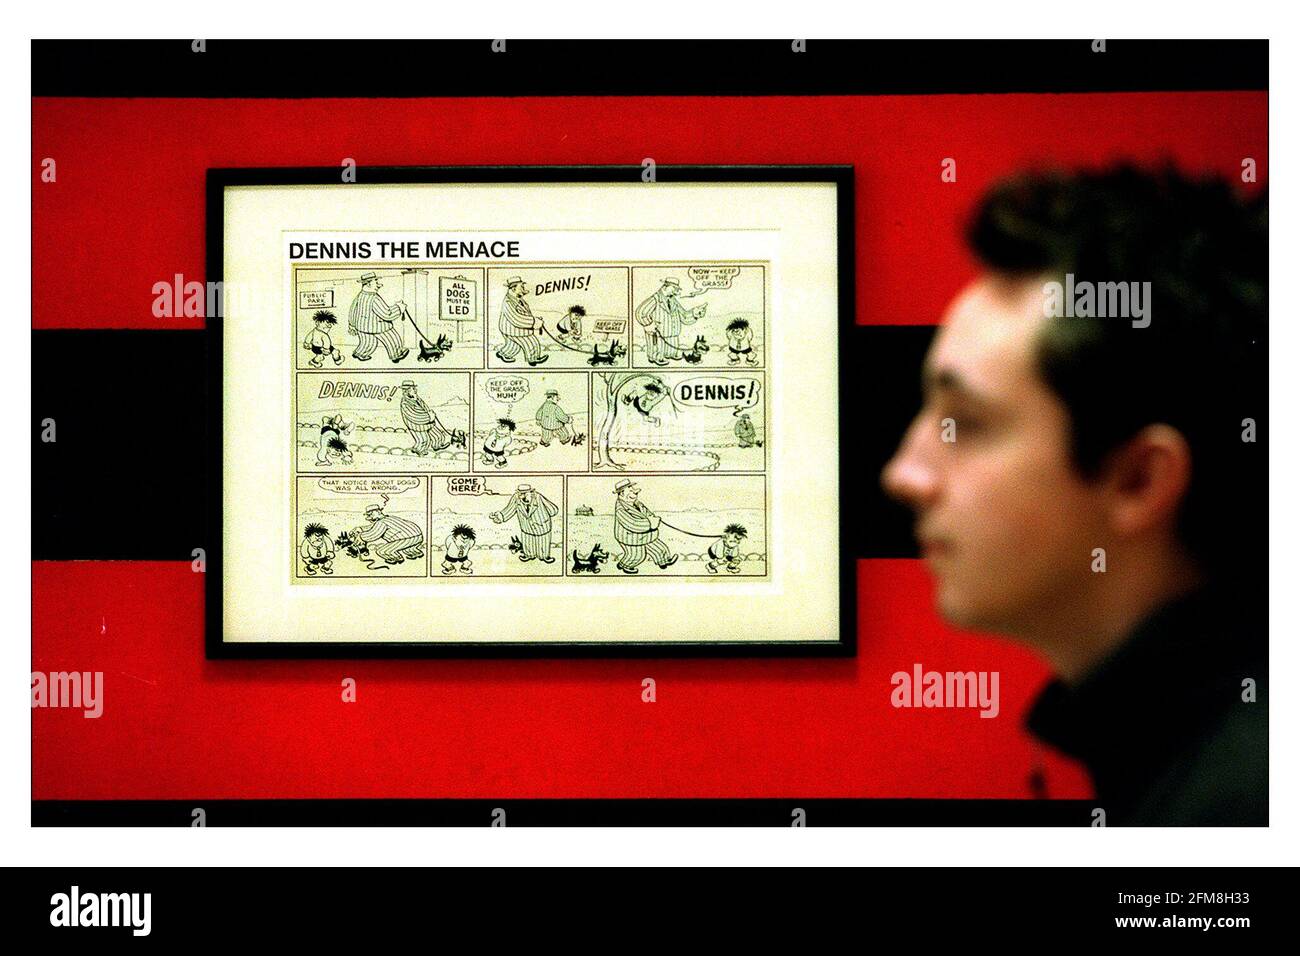 Dennis the Menace  March 2001Dennis the Menaces First appearance in the Beano March 17th 1951. Original artwork by David Law. Exhibition 19th March to 20 April at the British Cartoon Centre London Stock Photo